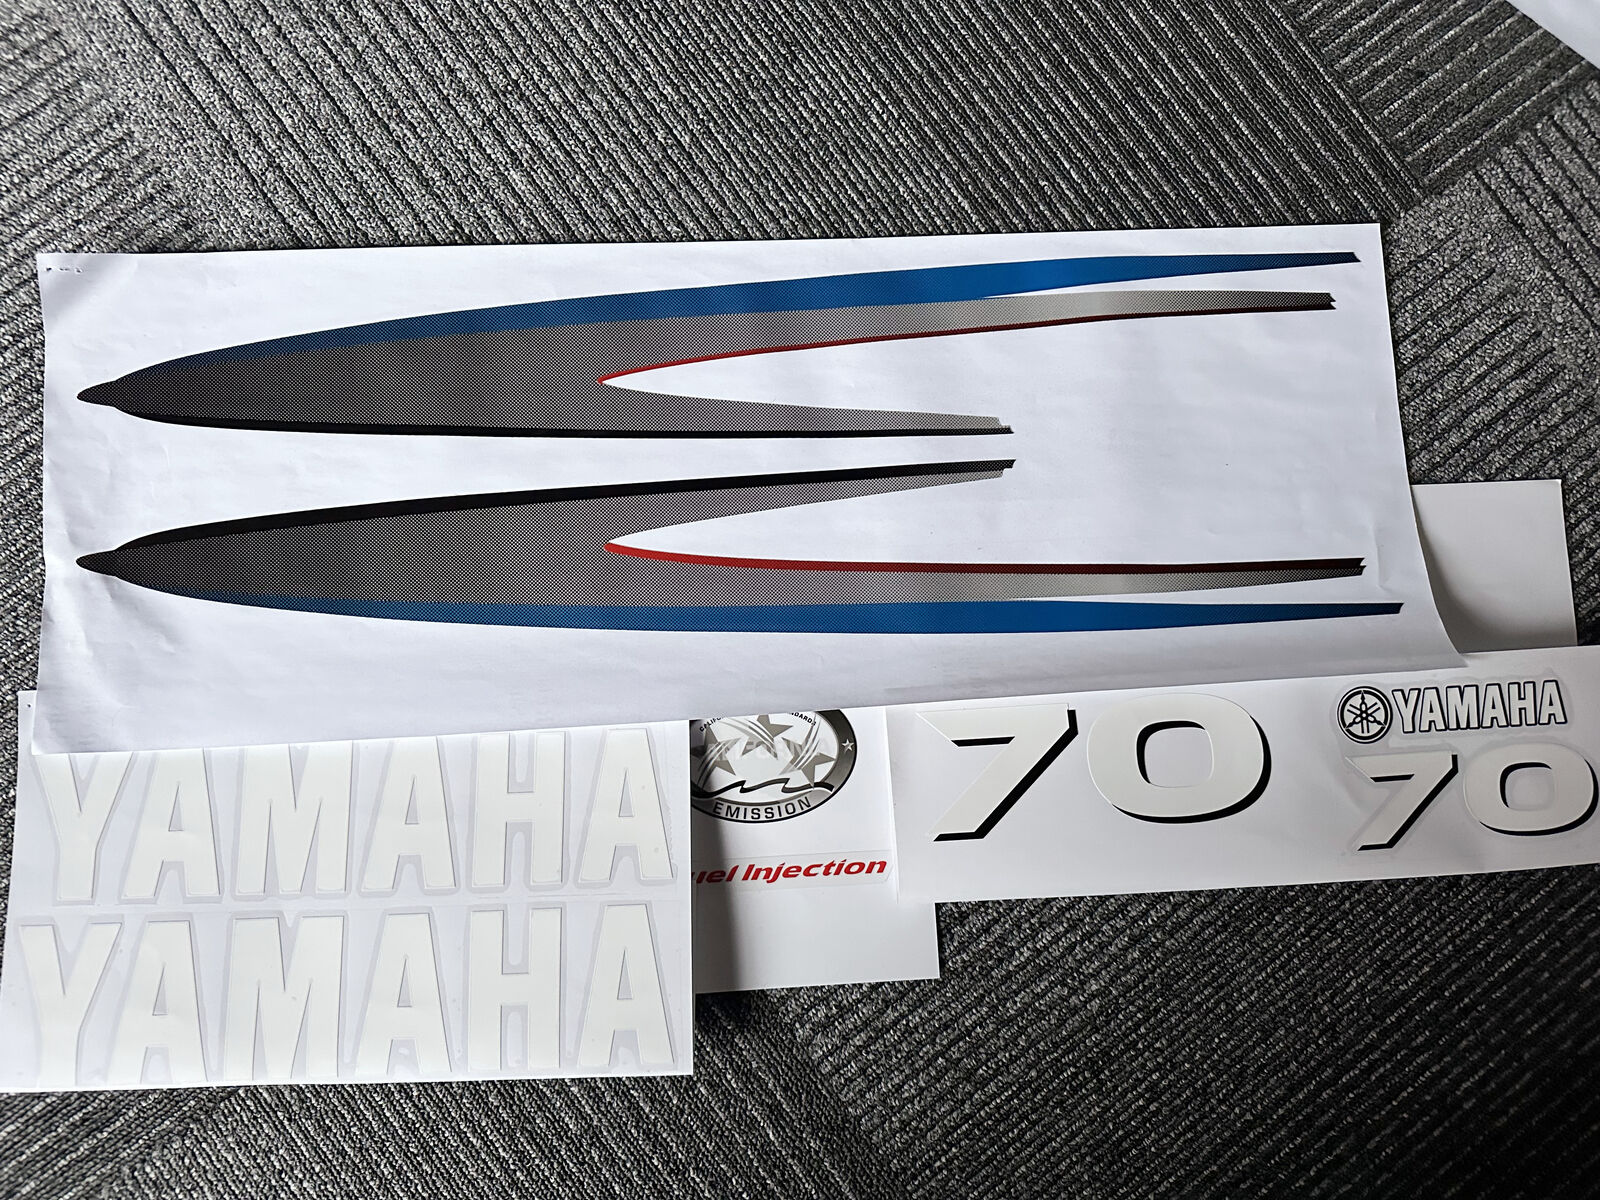 Yamaha 70hp 2 stroke outboard engine decals/sticker kit